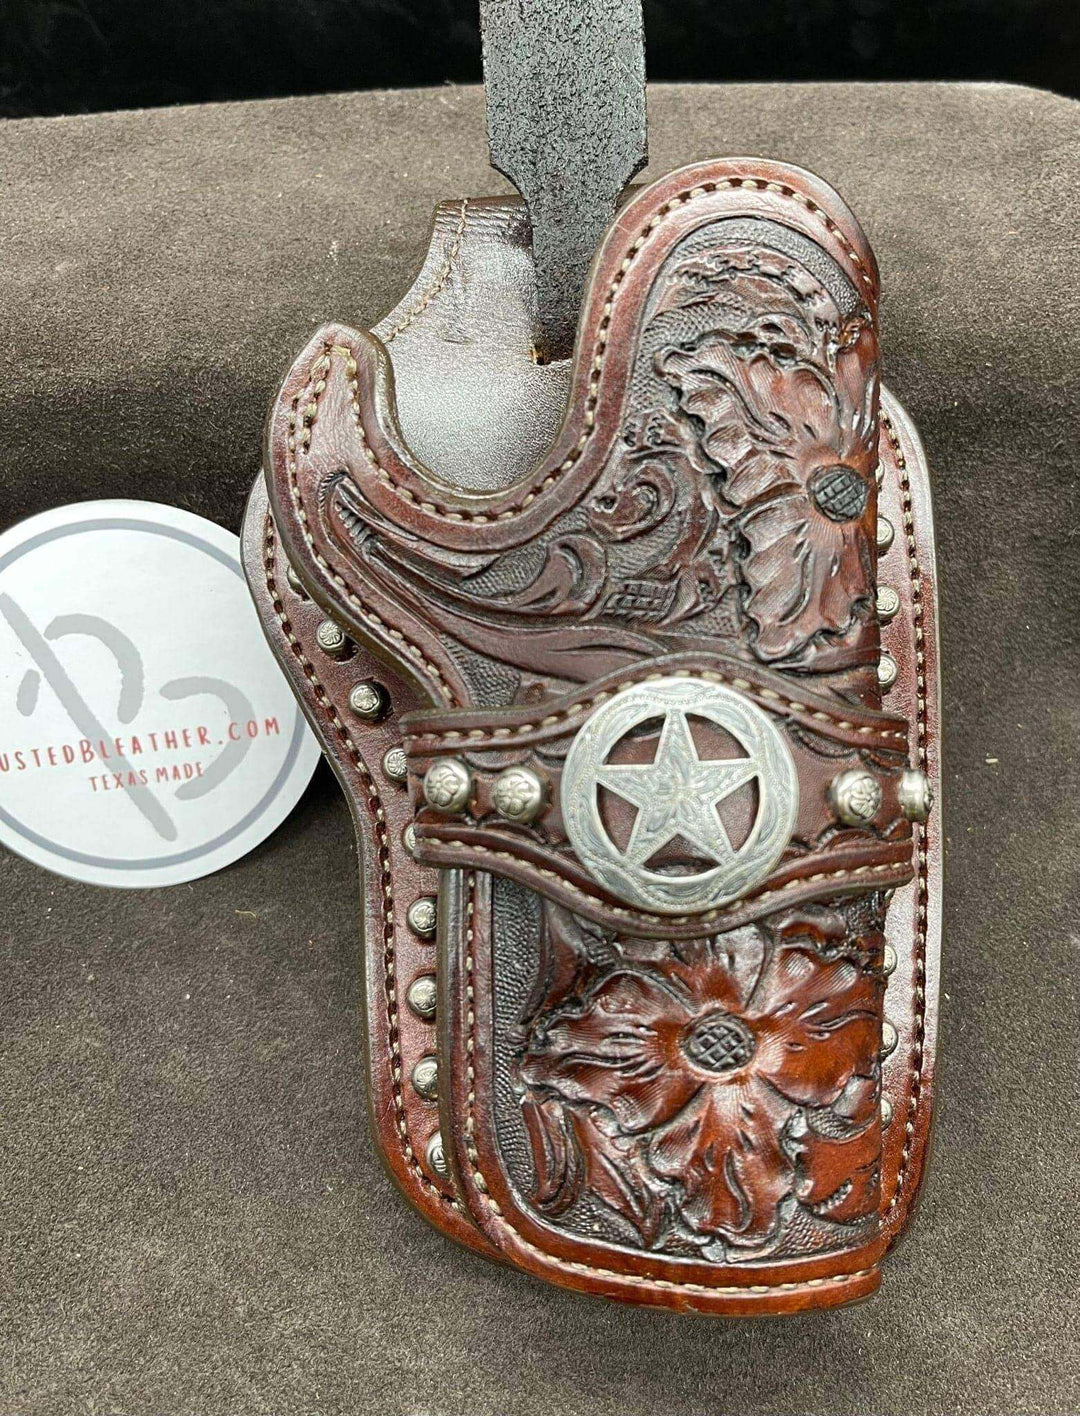 *Made to Order* LH/RH High Noon for 1911 "Los Diablos Tejanos" w/ Hand Carved Floral Tooling-Busted B Leather